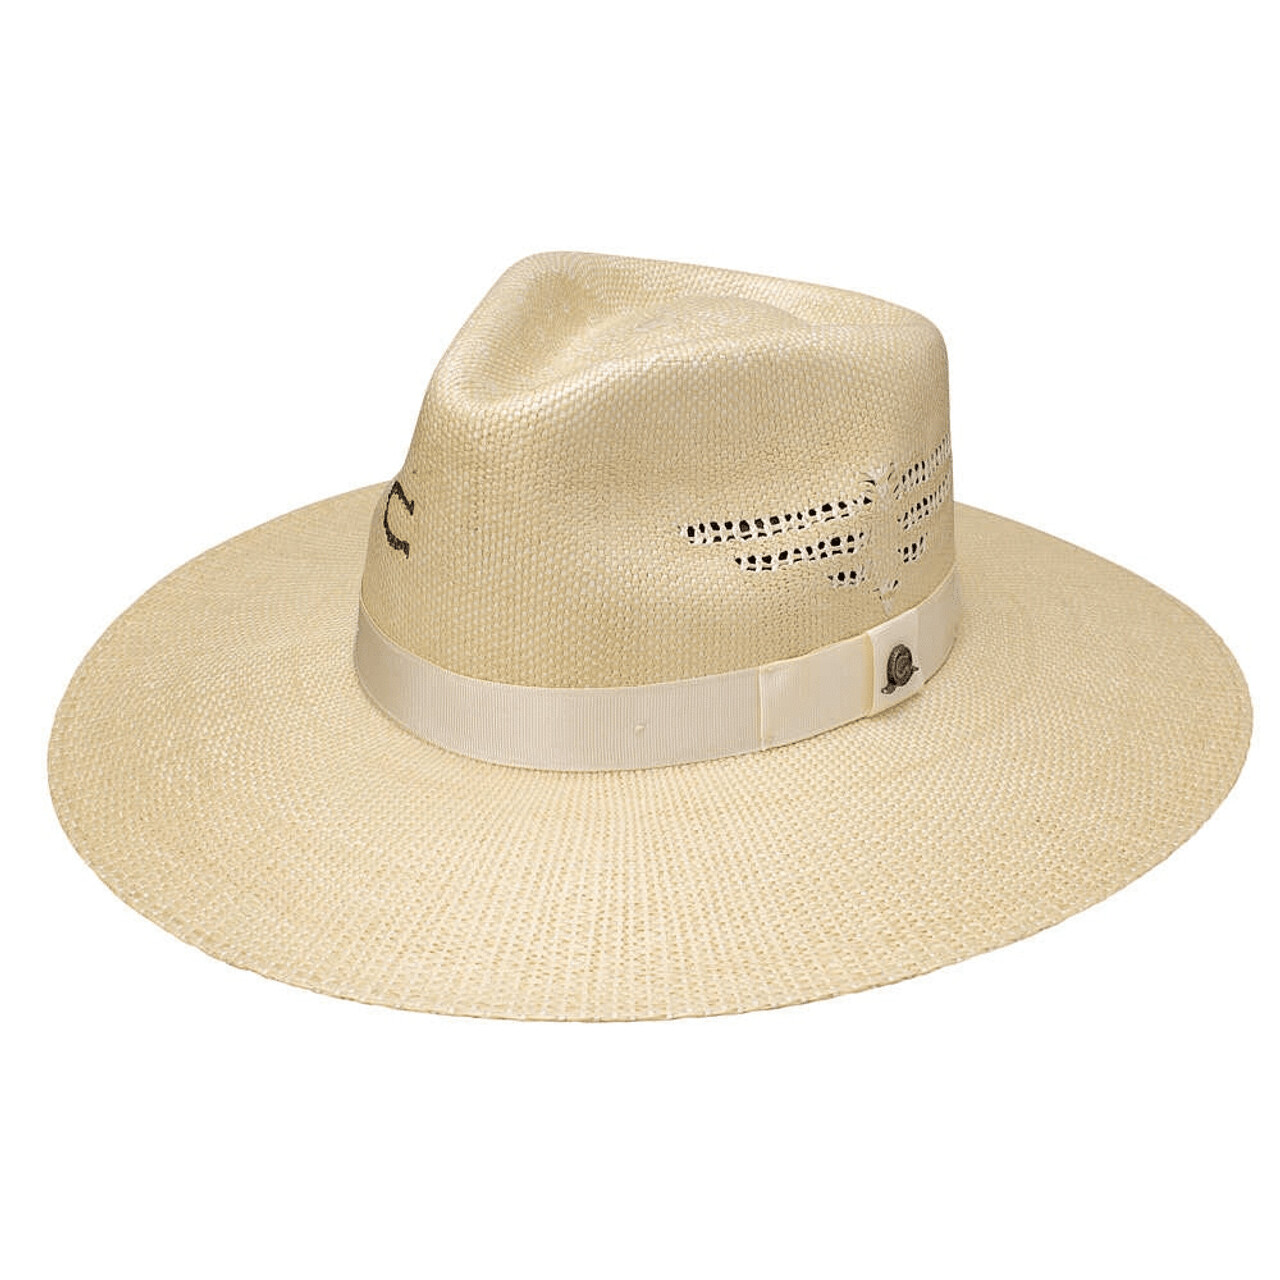 CHARLIE 1 HORSE MEXICO SHORE STRAW HAT